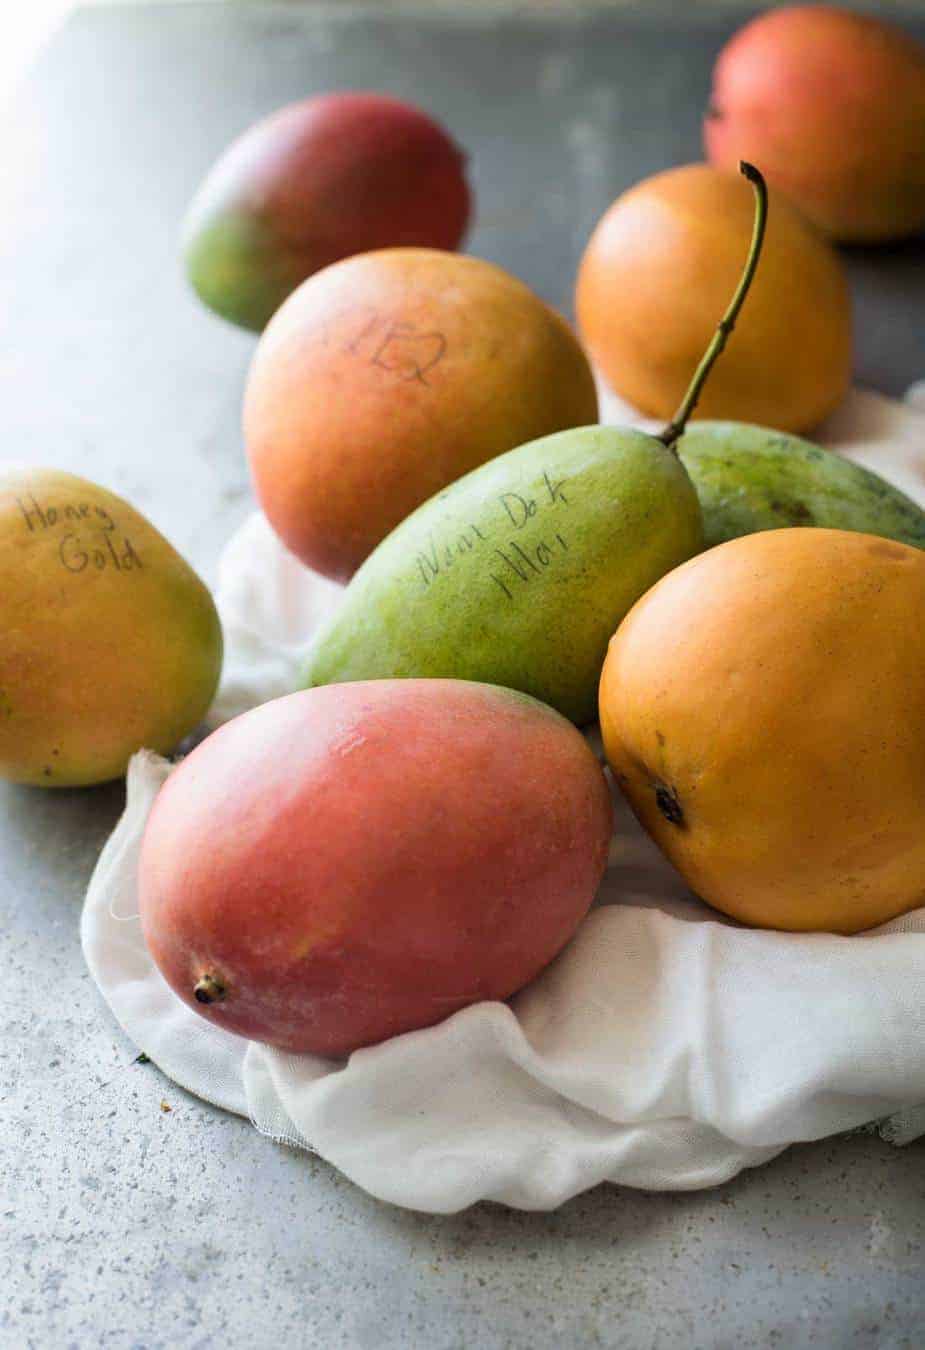 Different mango varieties grown at Groves Grown Tropical Fruits farm